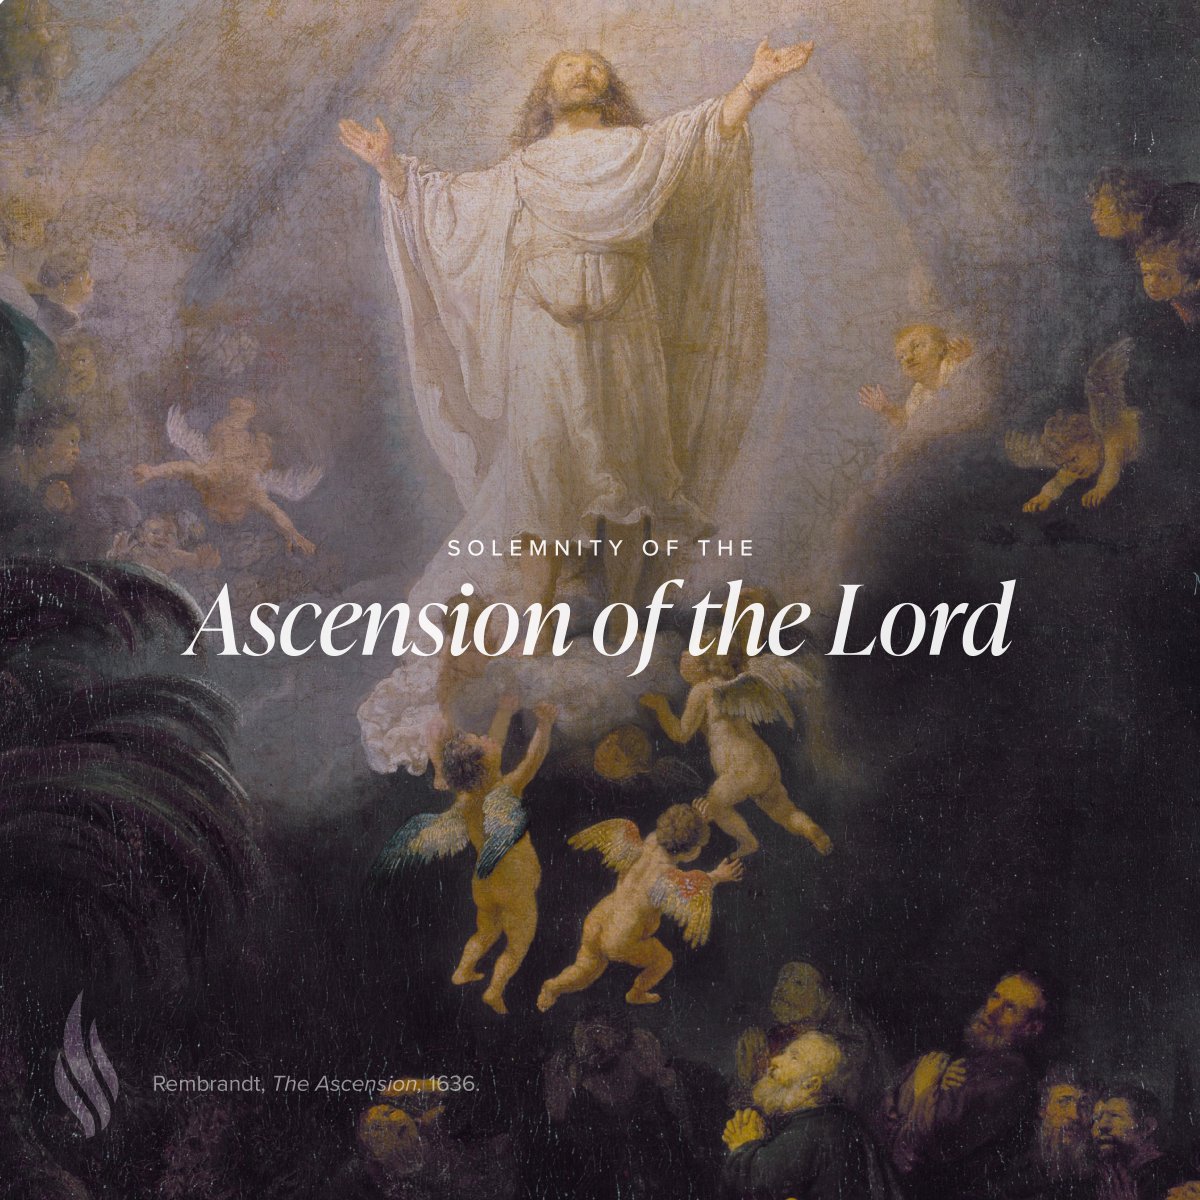 “Today our Lord Jesus Christ ascended into heaven; let our hearts ascend with him.” —St. Augustine